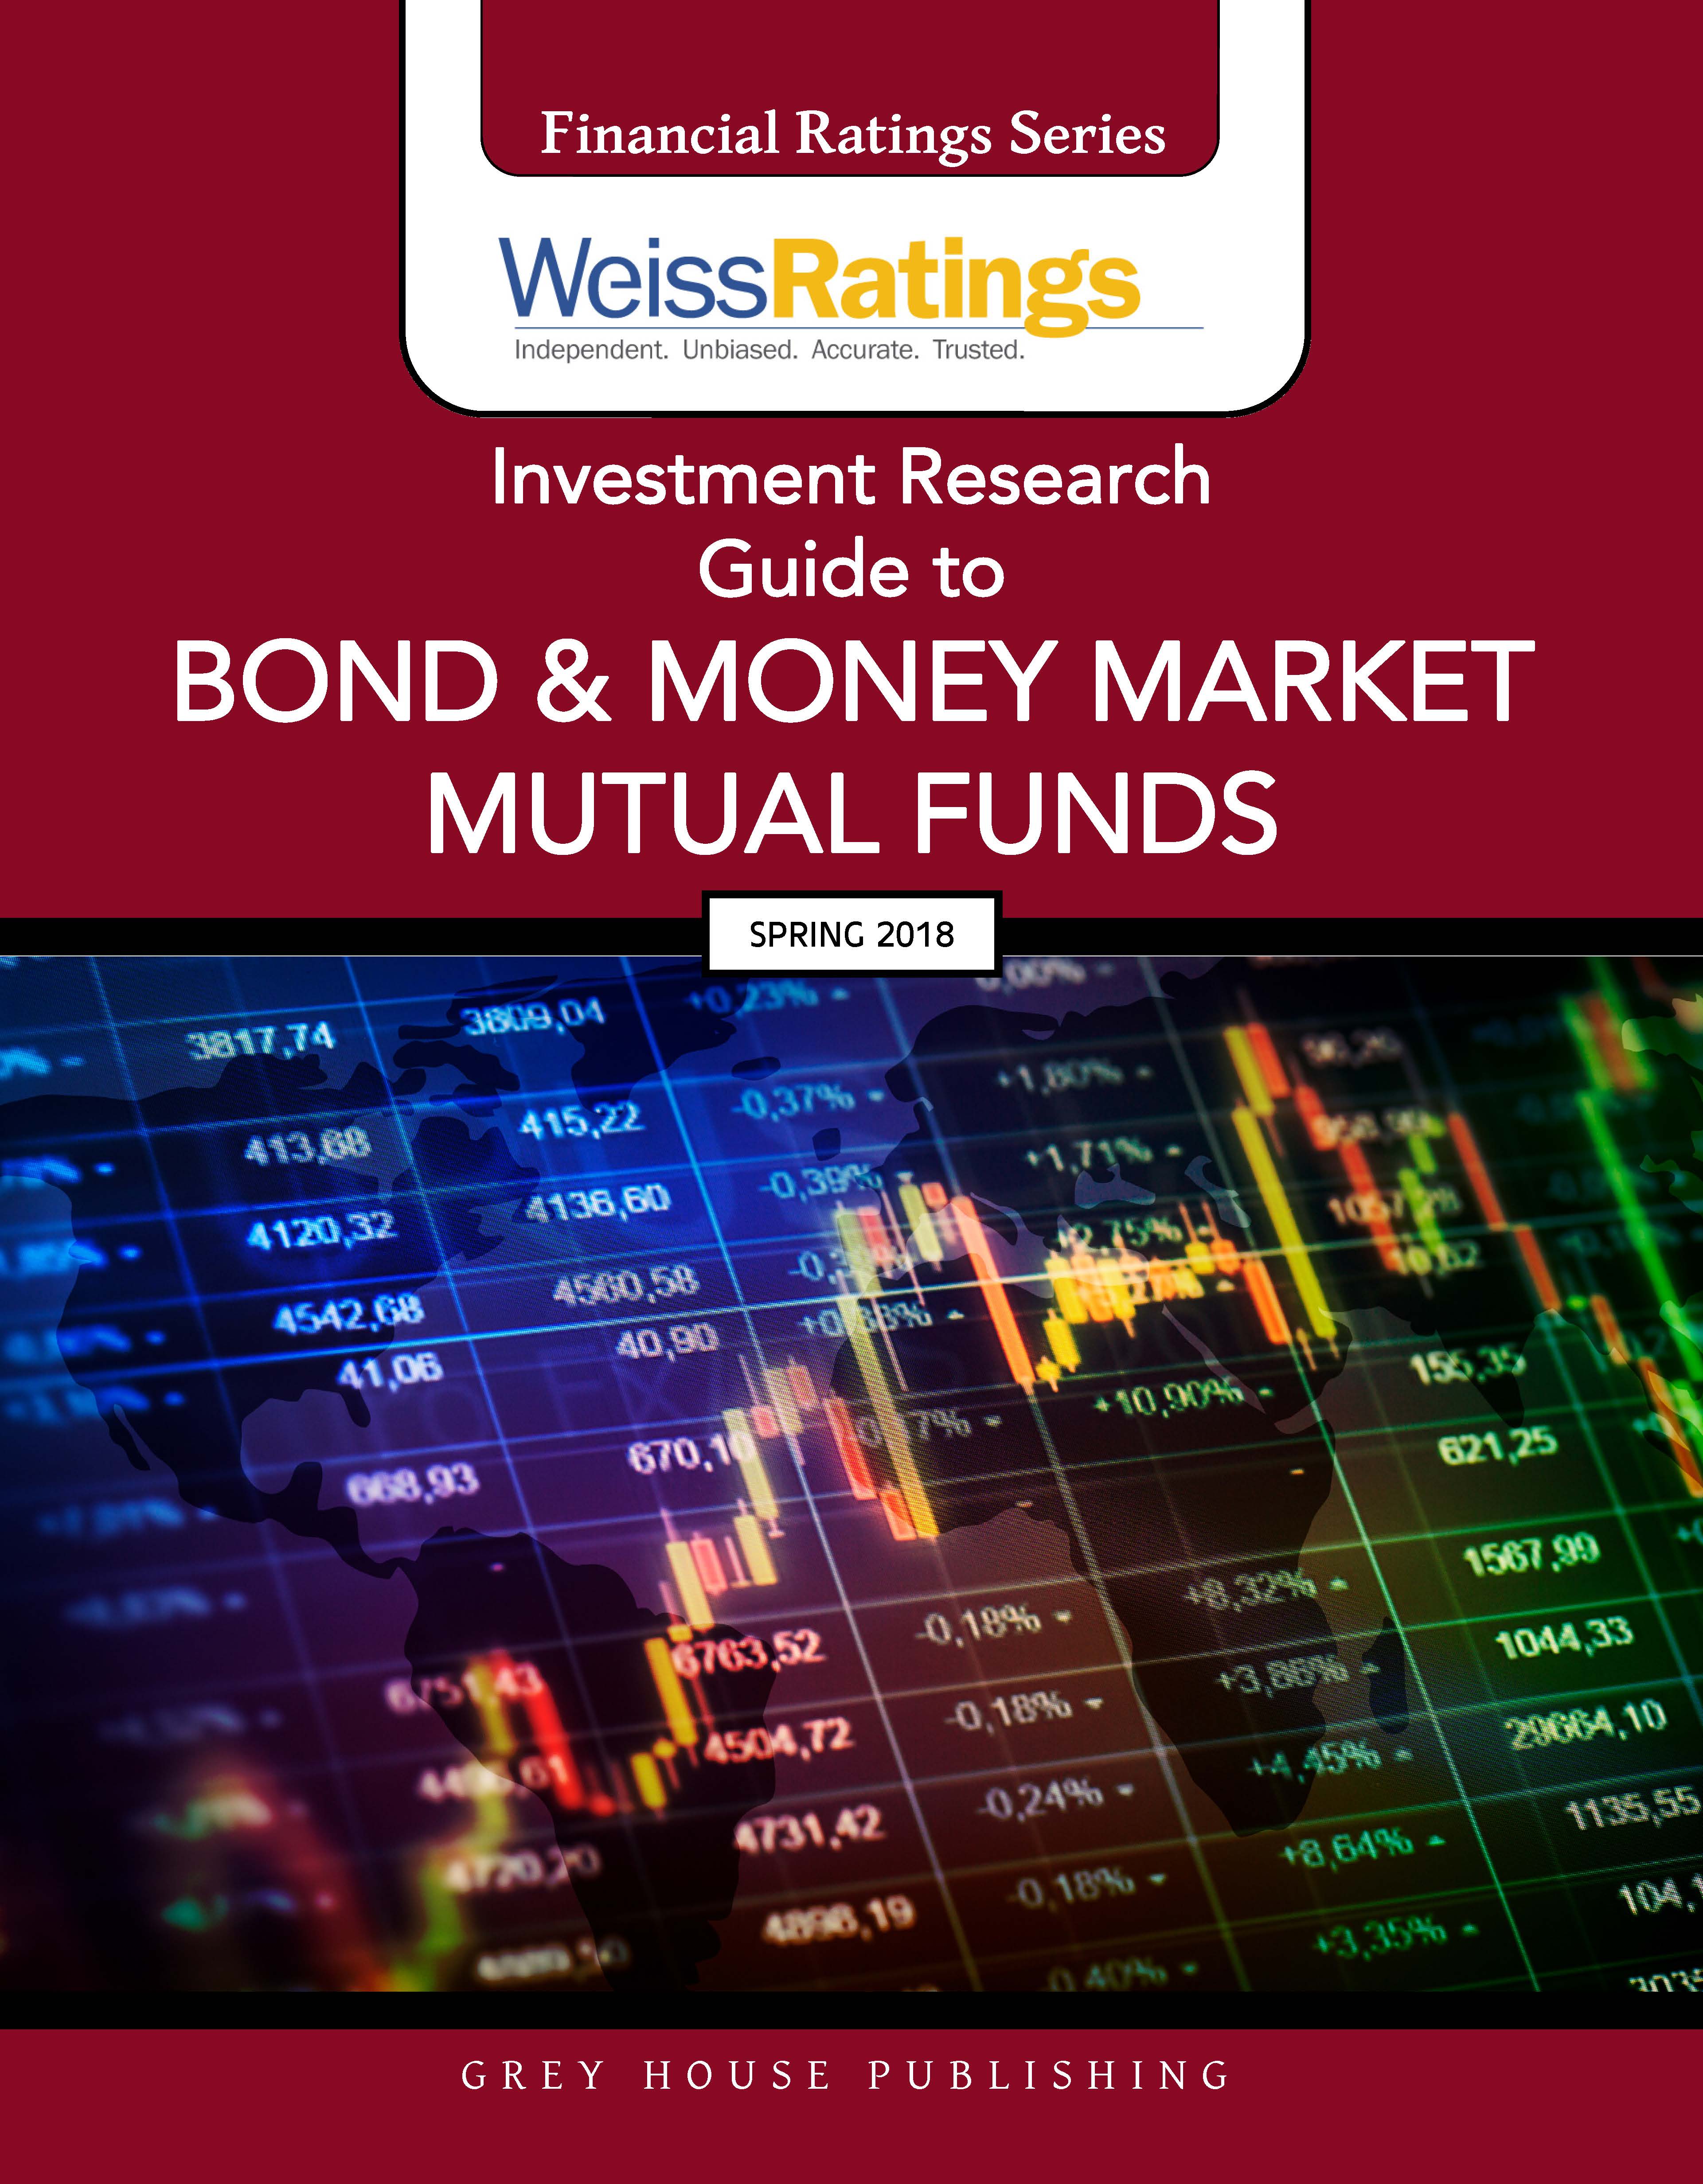 Weiss Ratings Investment Research Guide to Bond & Money Market Mutual Funds